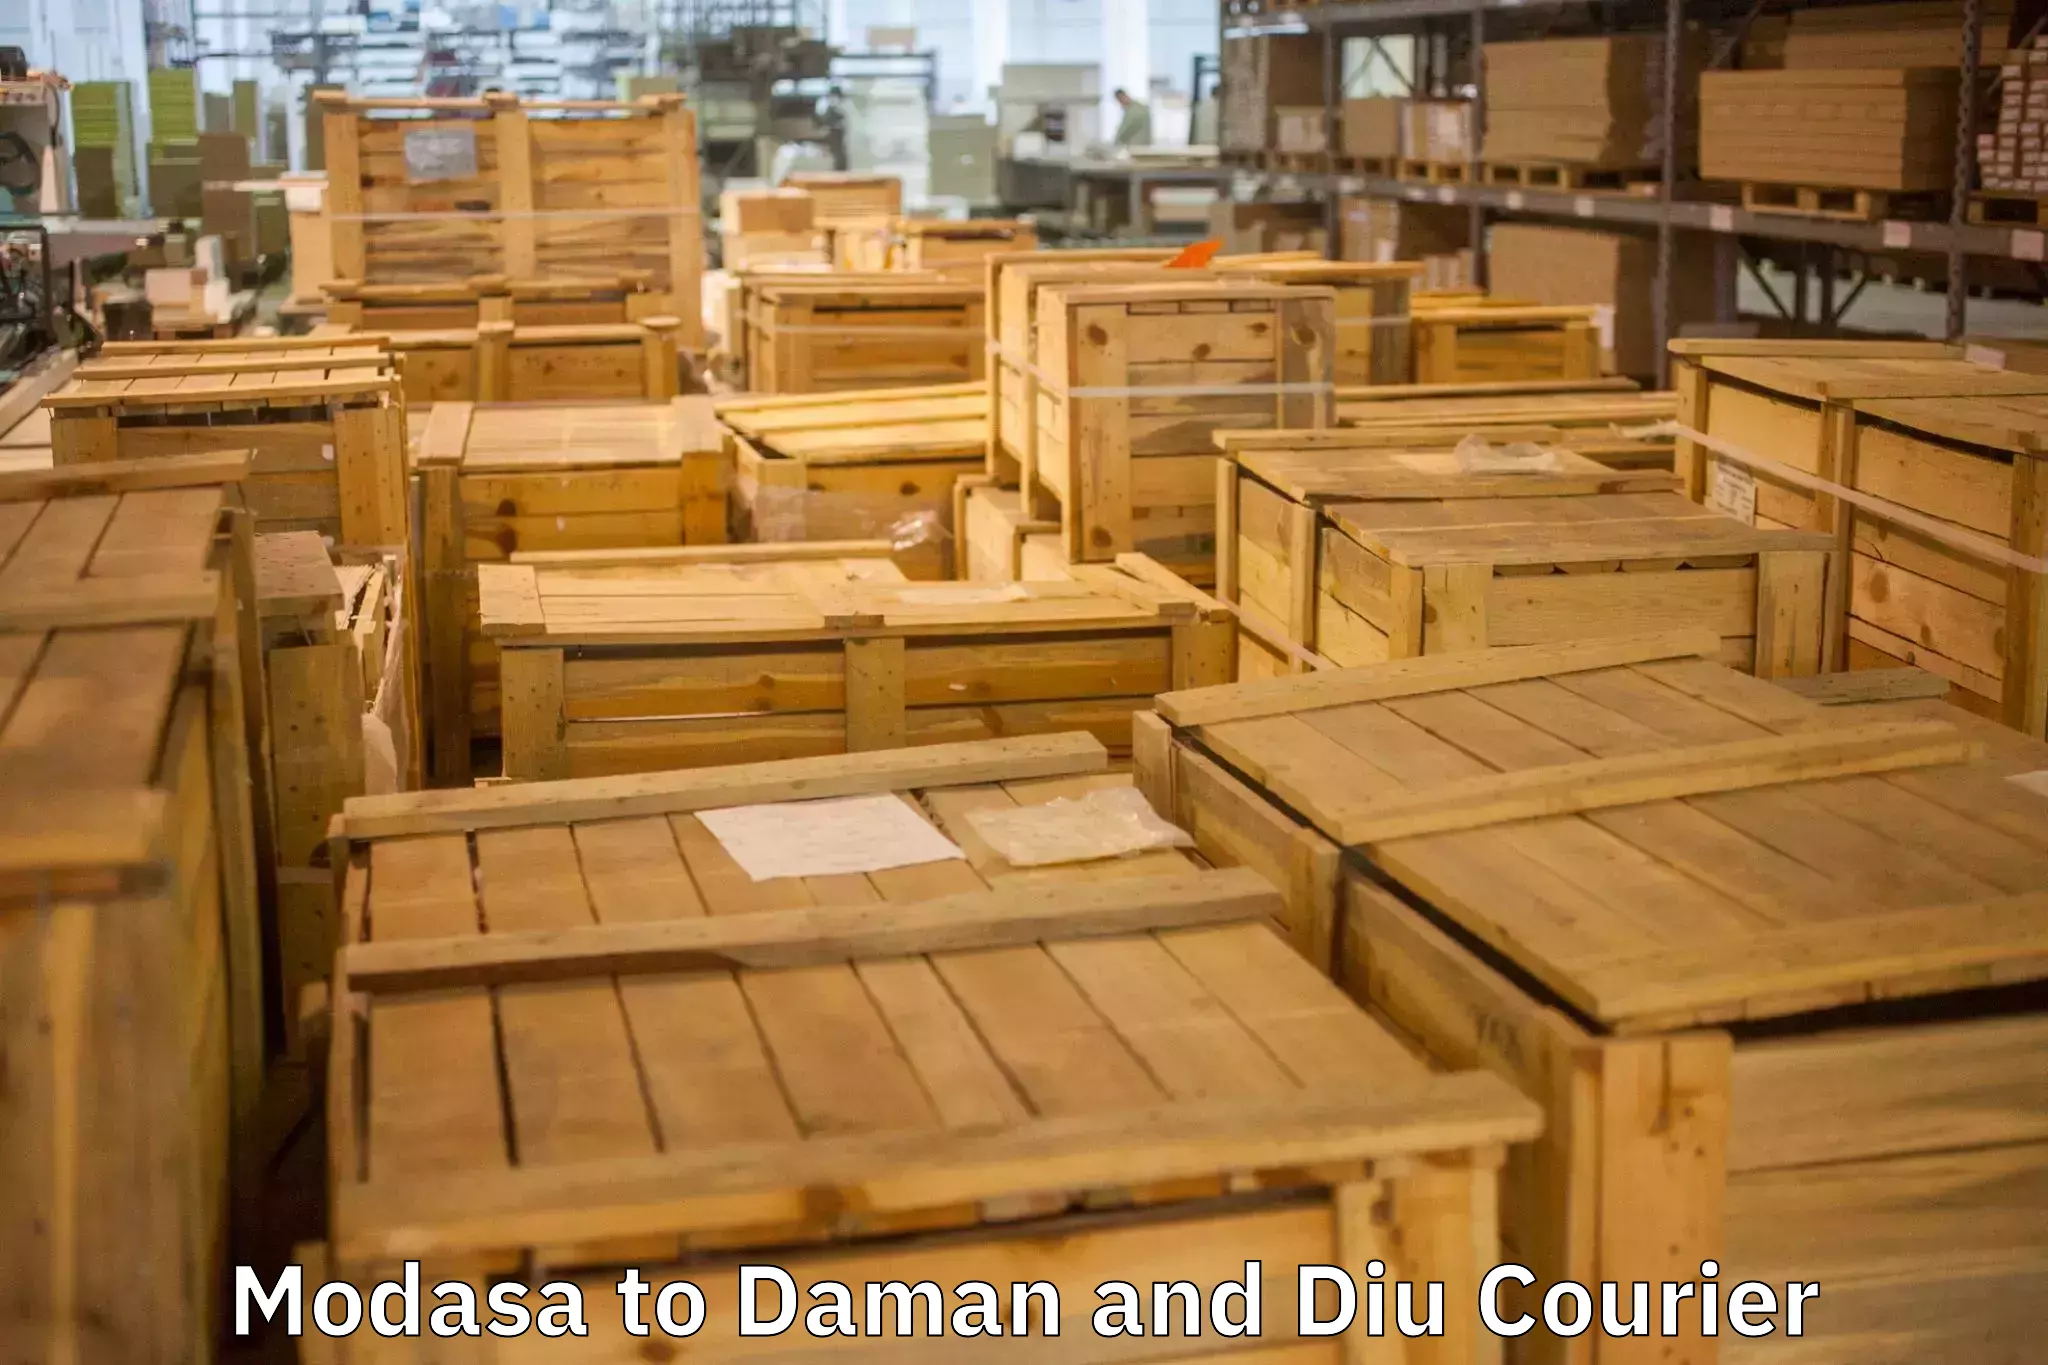 Trusted relocation experts Modasa to Daman